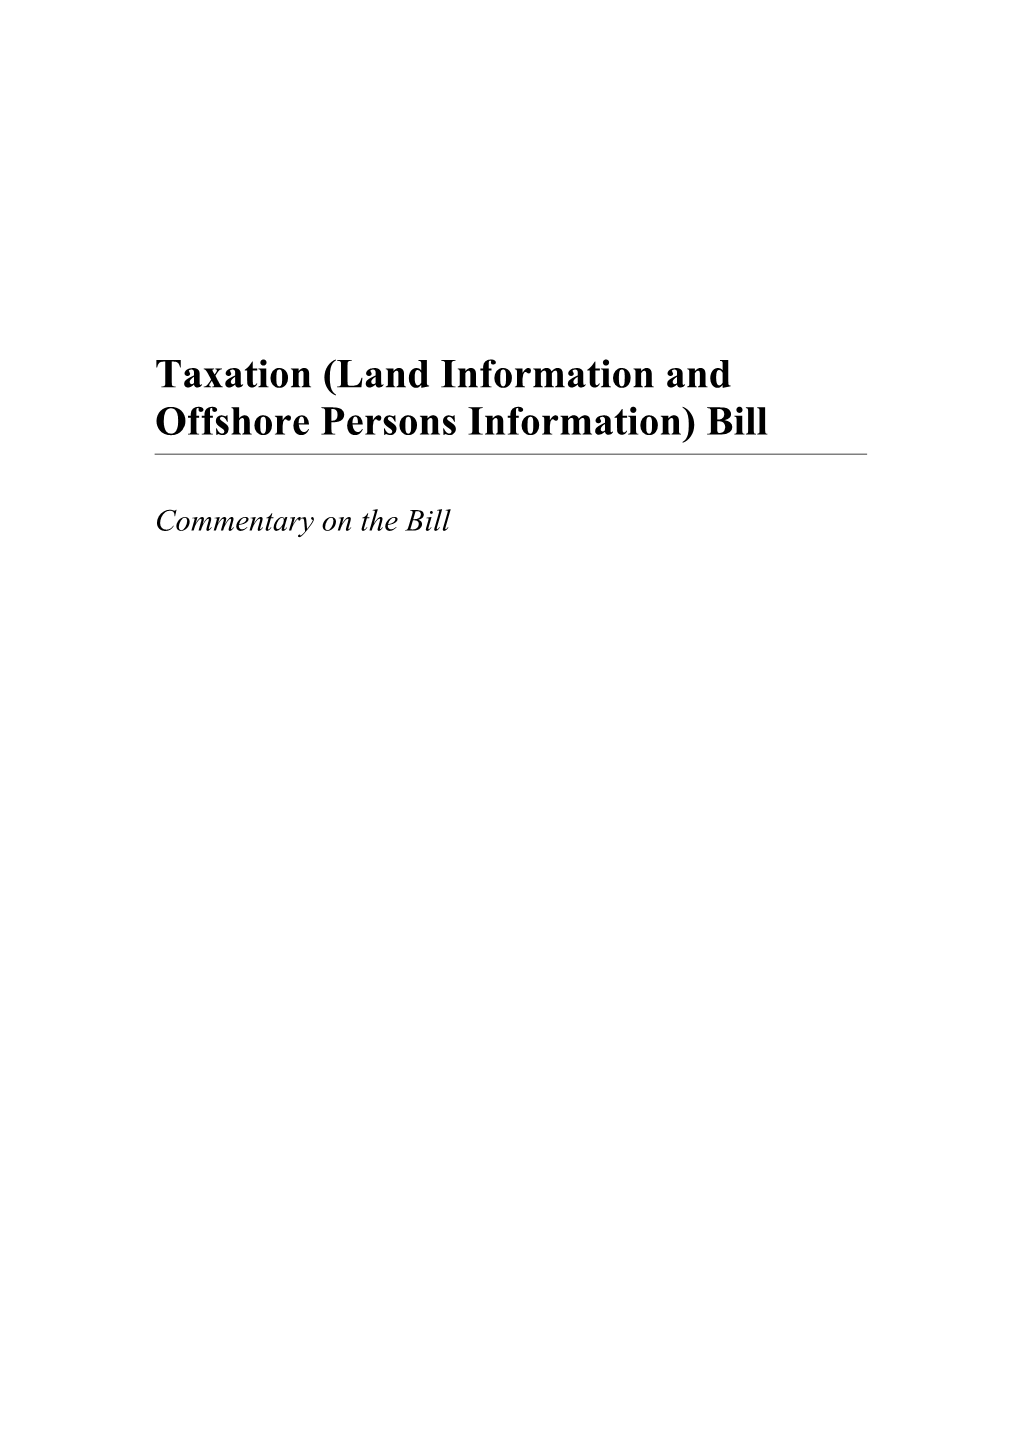 Taxation (Land Information and Offshore Persons Information) Bill - Commentary on the Bill